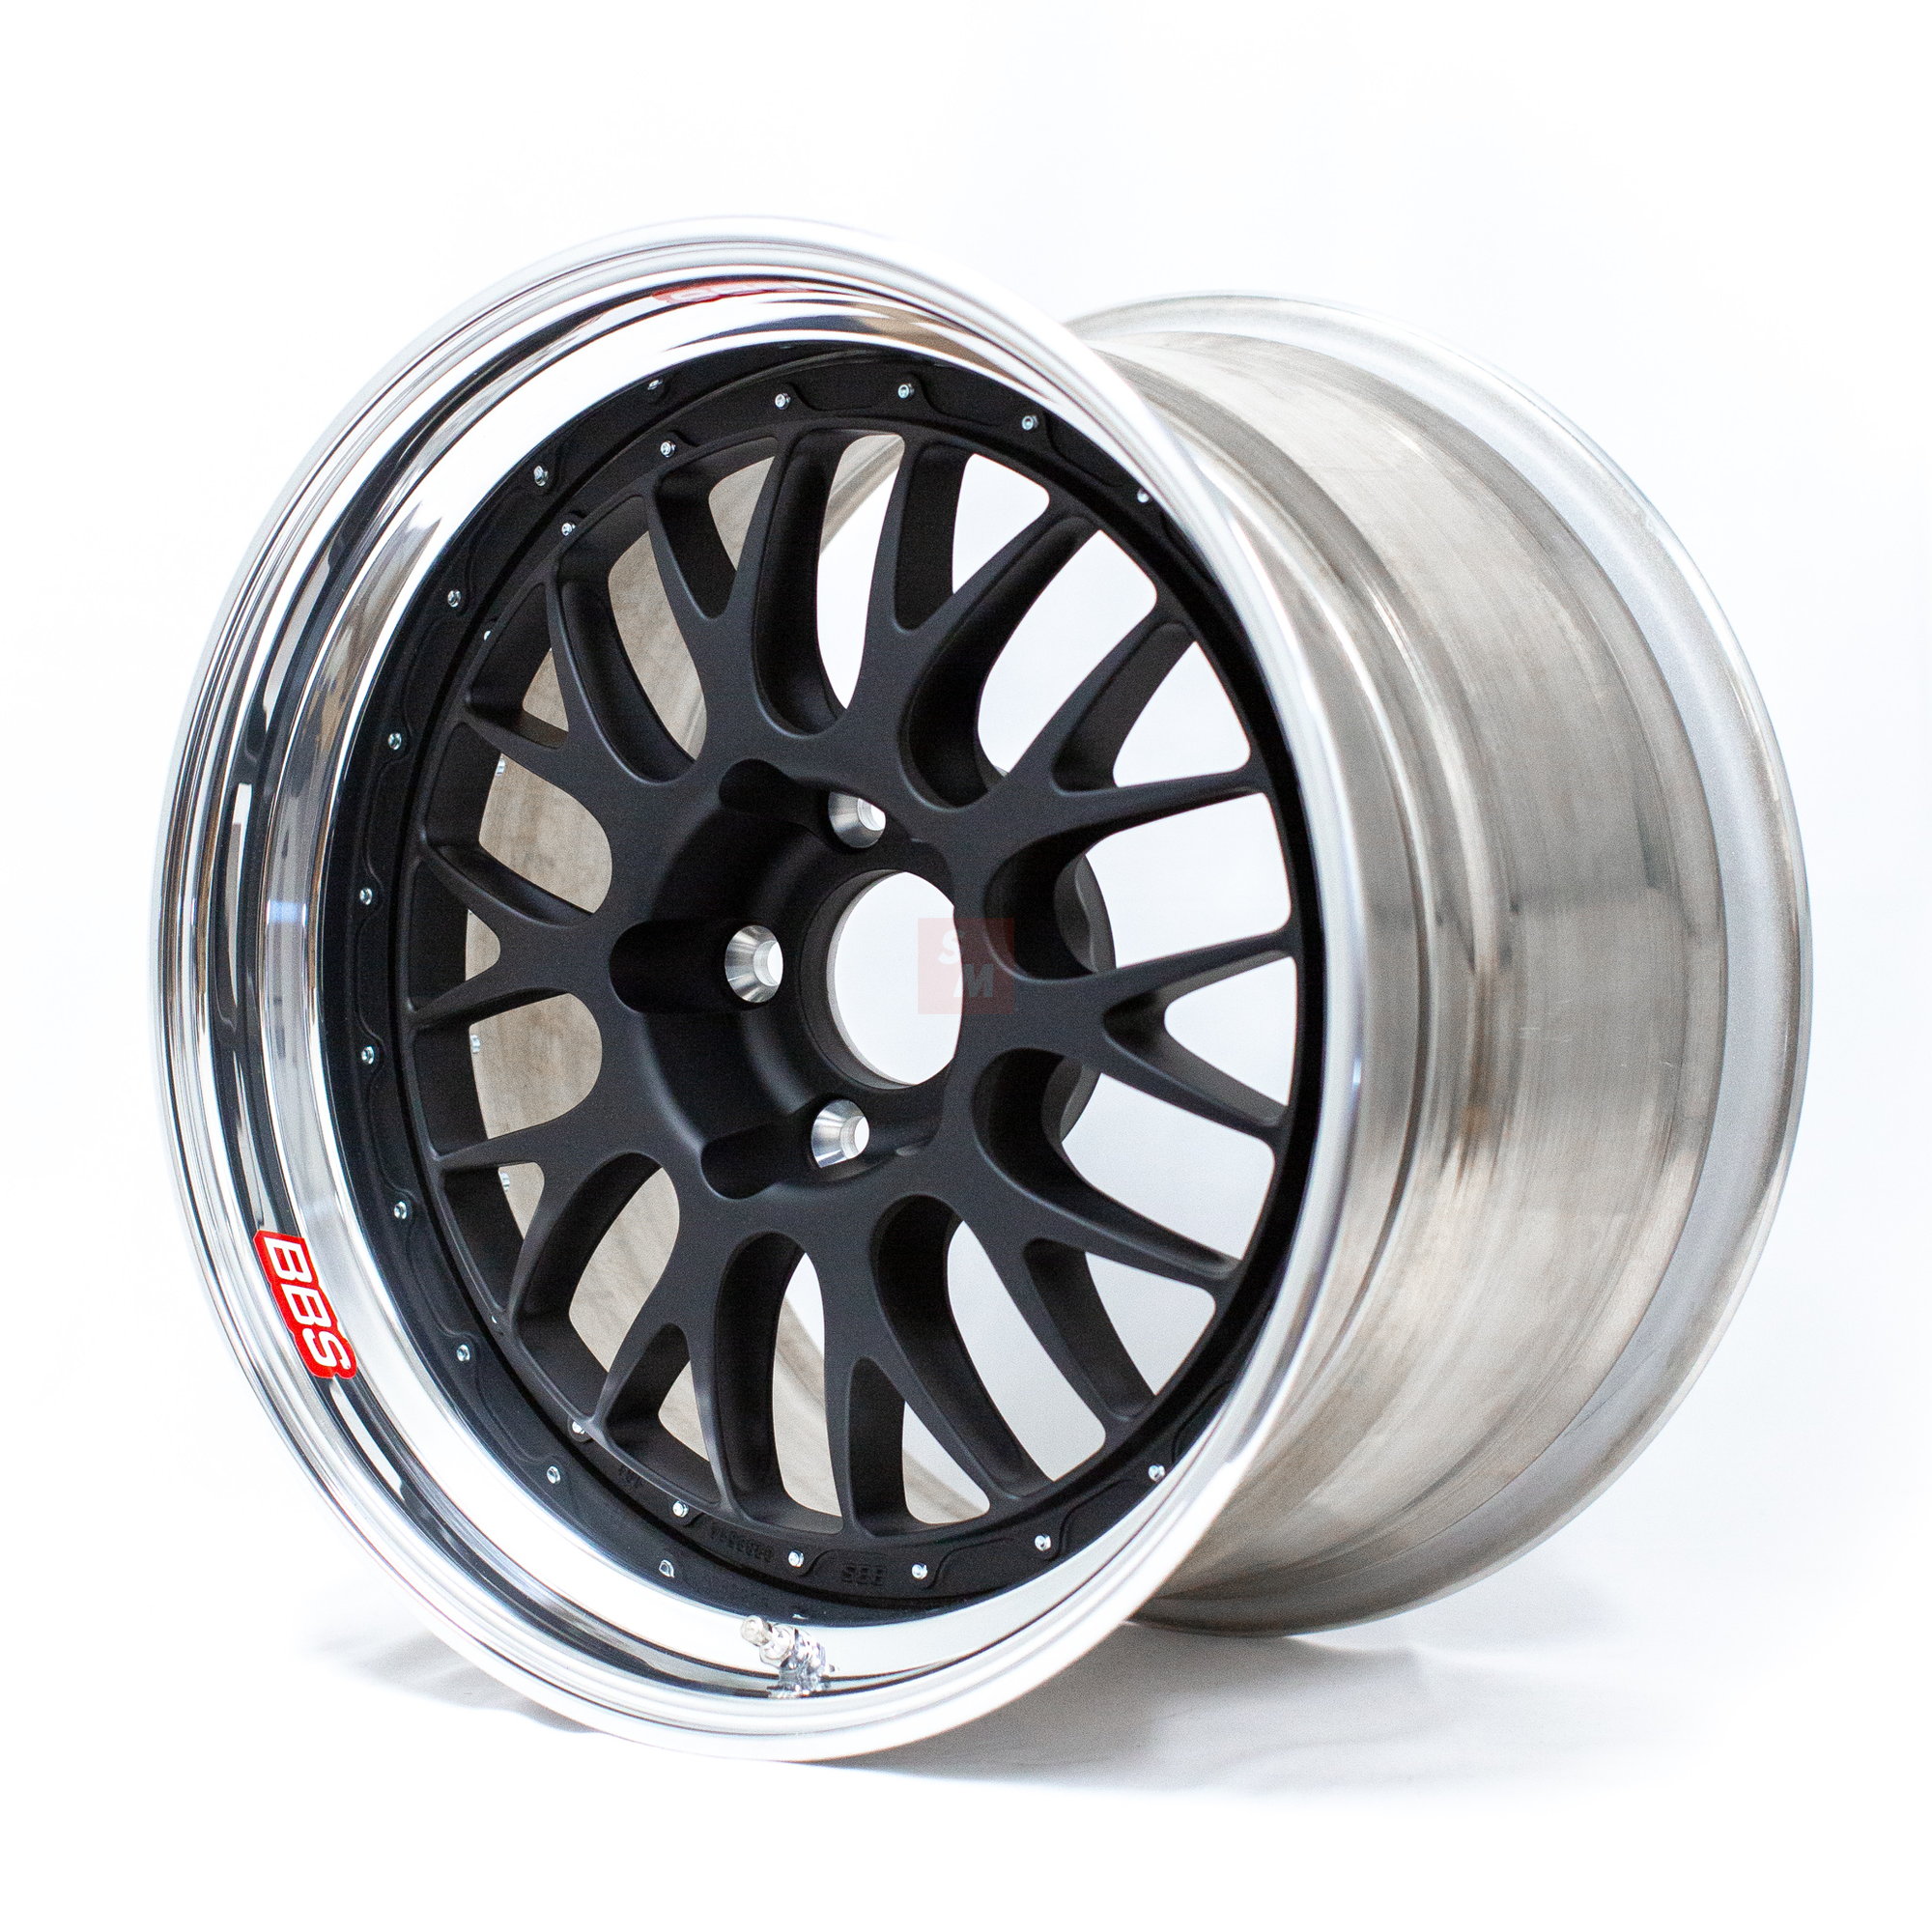 Wheels and Tires/Axles - BBS E88 + BBS Motorsport Wheel, Parts, Components - SYSTEM MOTORSPORTS - New - Hayward, CA 94545, United States